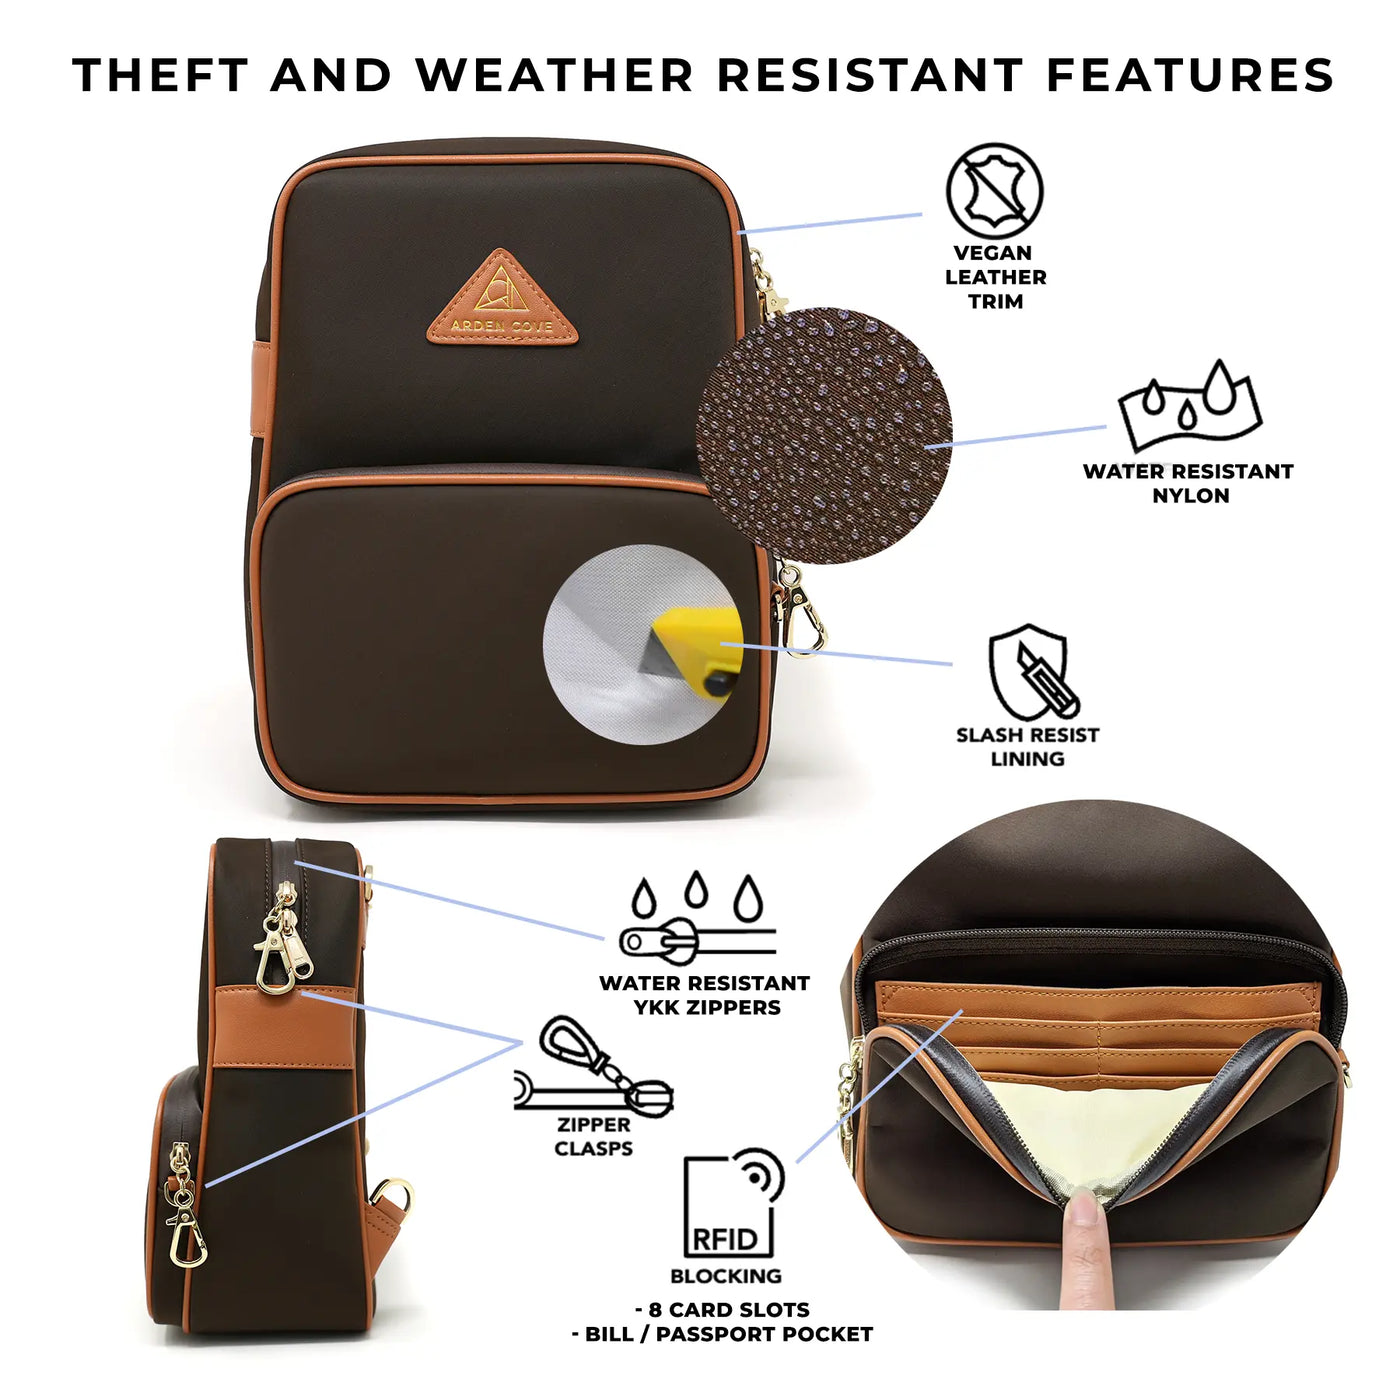 Theft and weather resistant Features of the Carmel Convertible Backpack and Crossbody